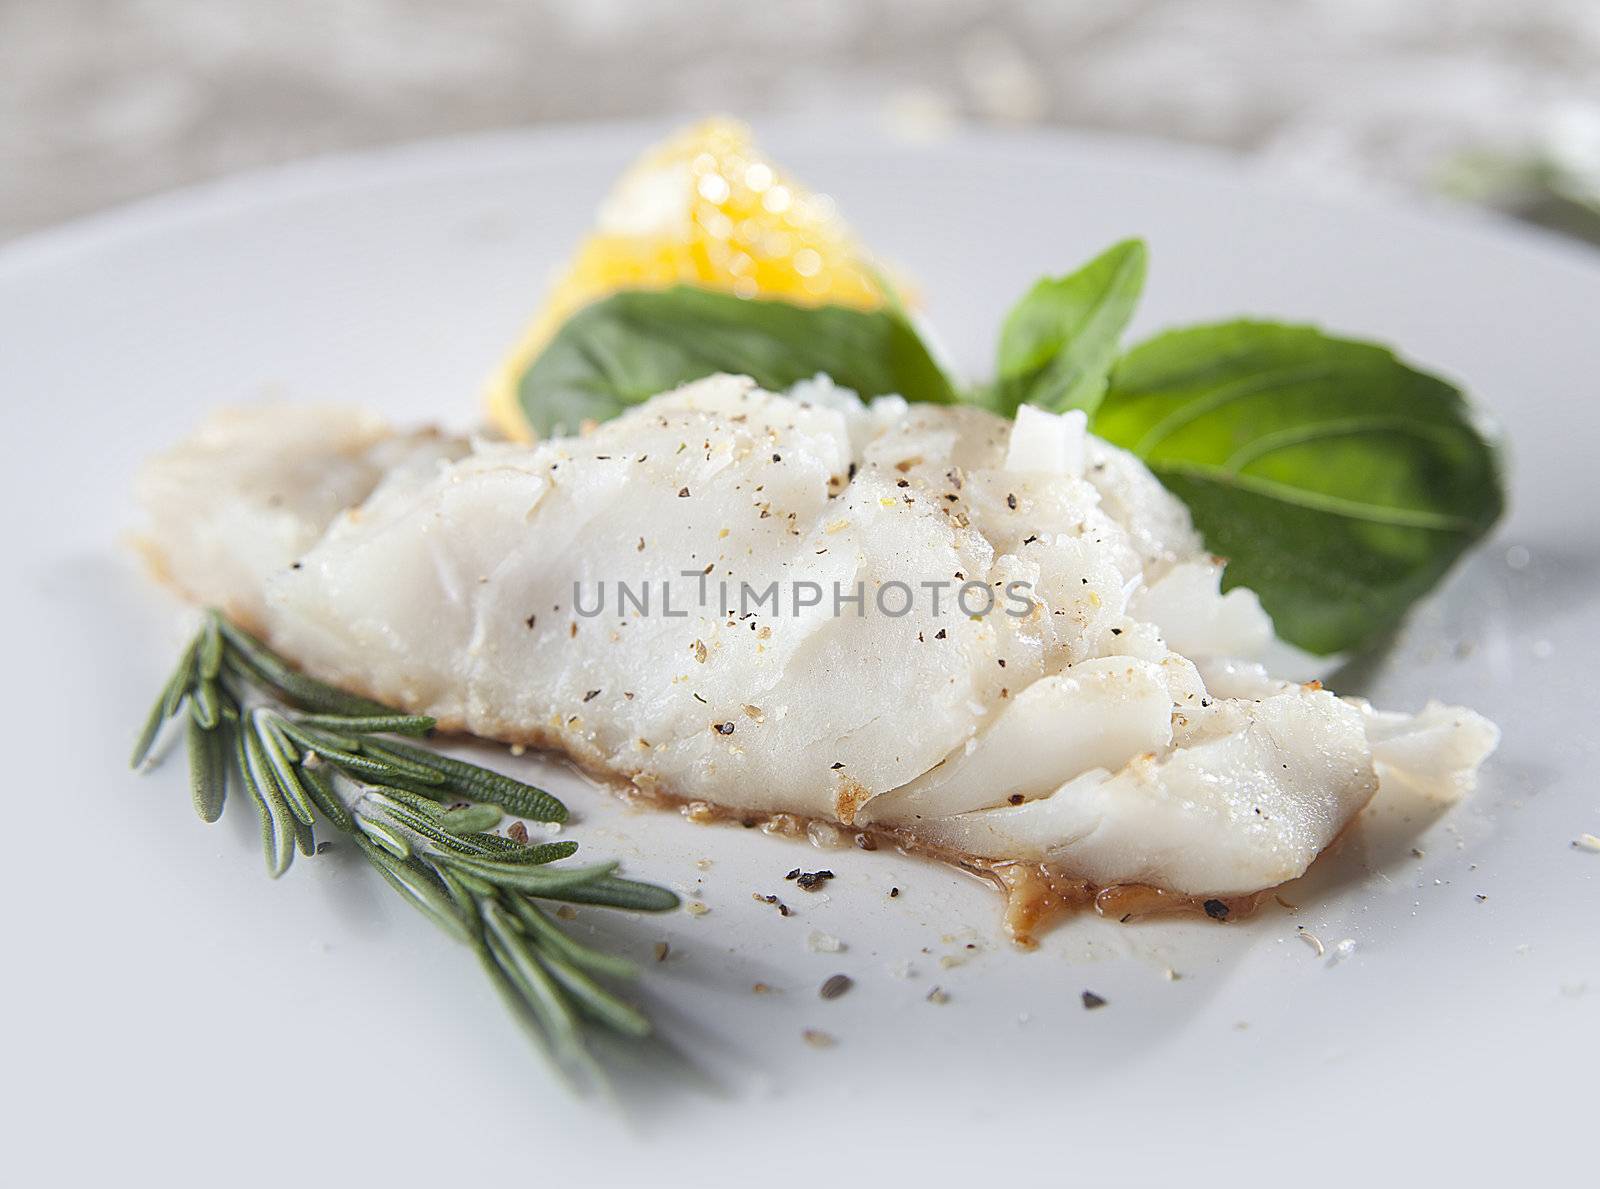 Fried cod by Angorius